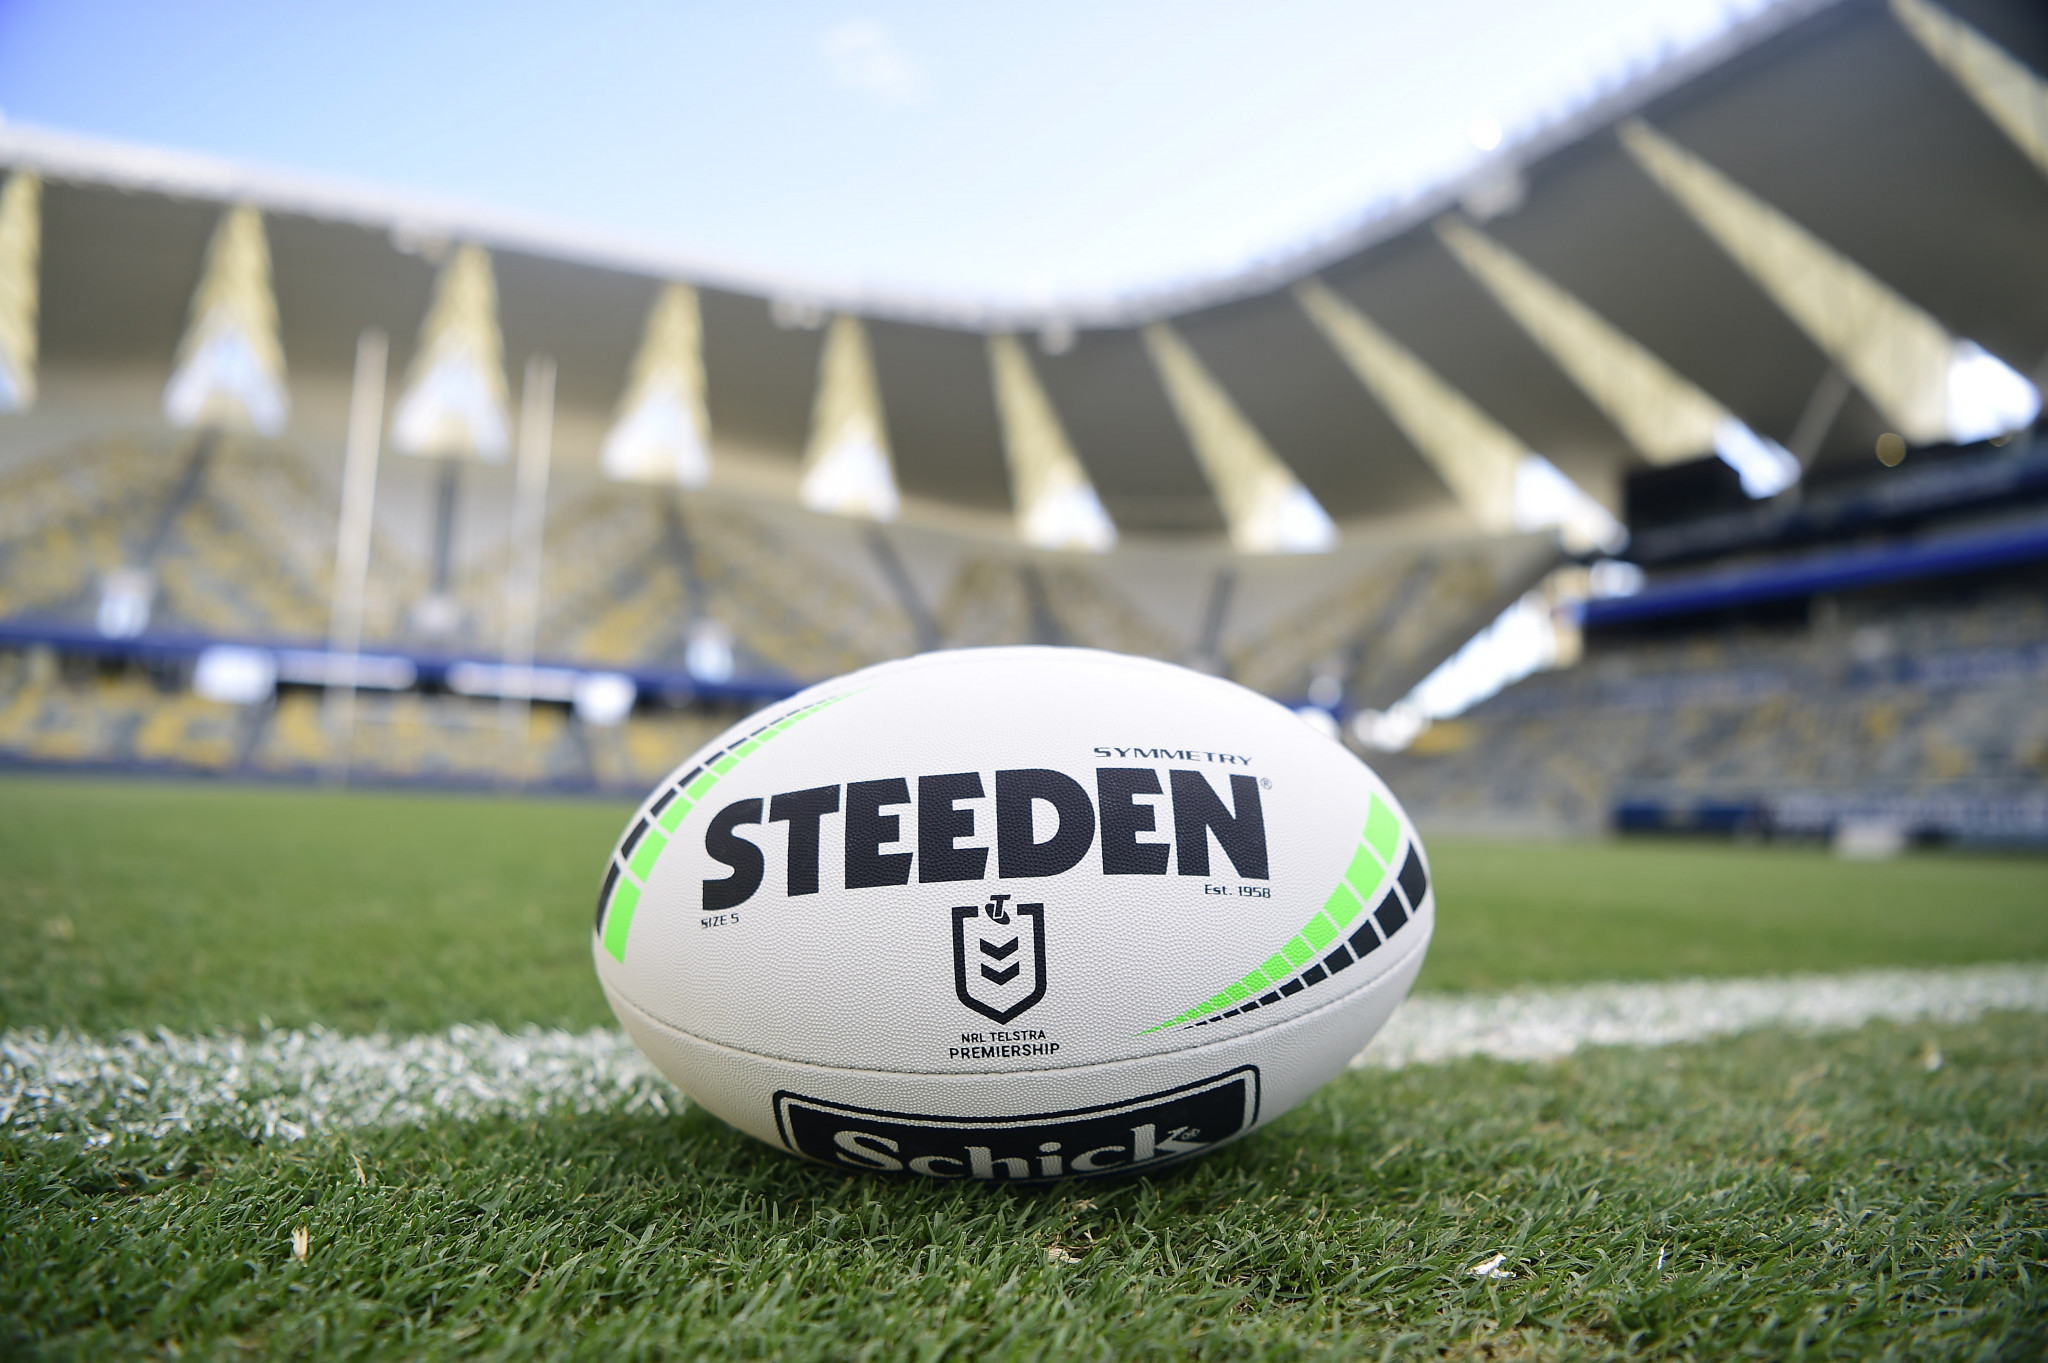 Rugby league player Spiers banned for three years after anti-doping violation